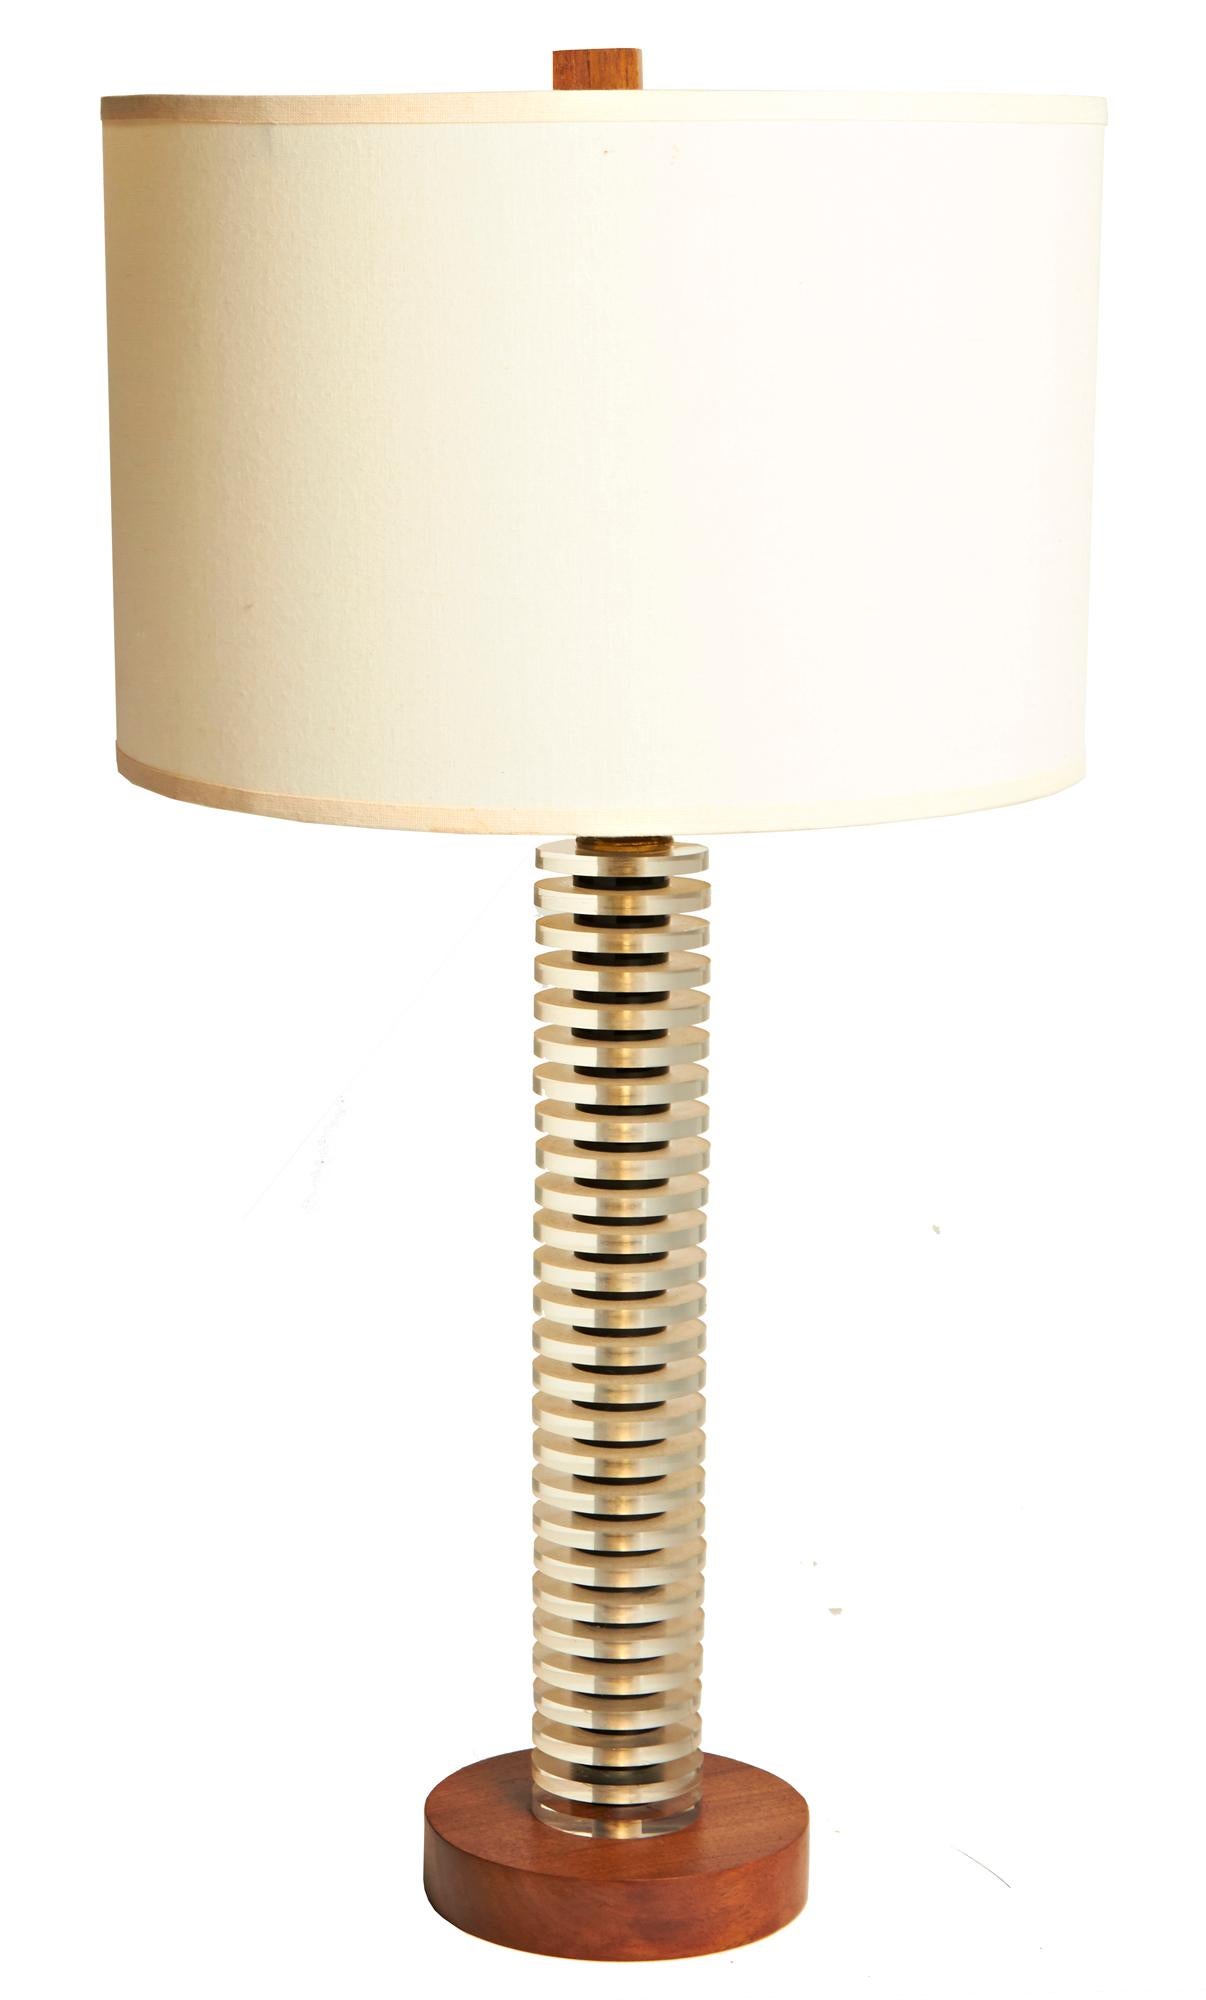 This elegant lamp has a wooden disk base on which is mounted a column comprised of 27 translucent Lucite disks separated by smaller shiny black Lucite collars. The cube shaped wooden finial co-ordinates with the wooden base and all parts of this